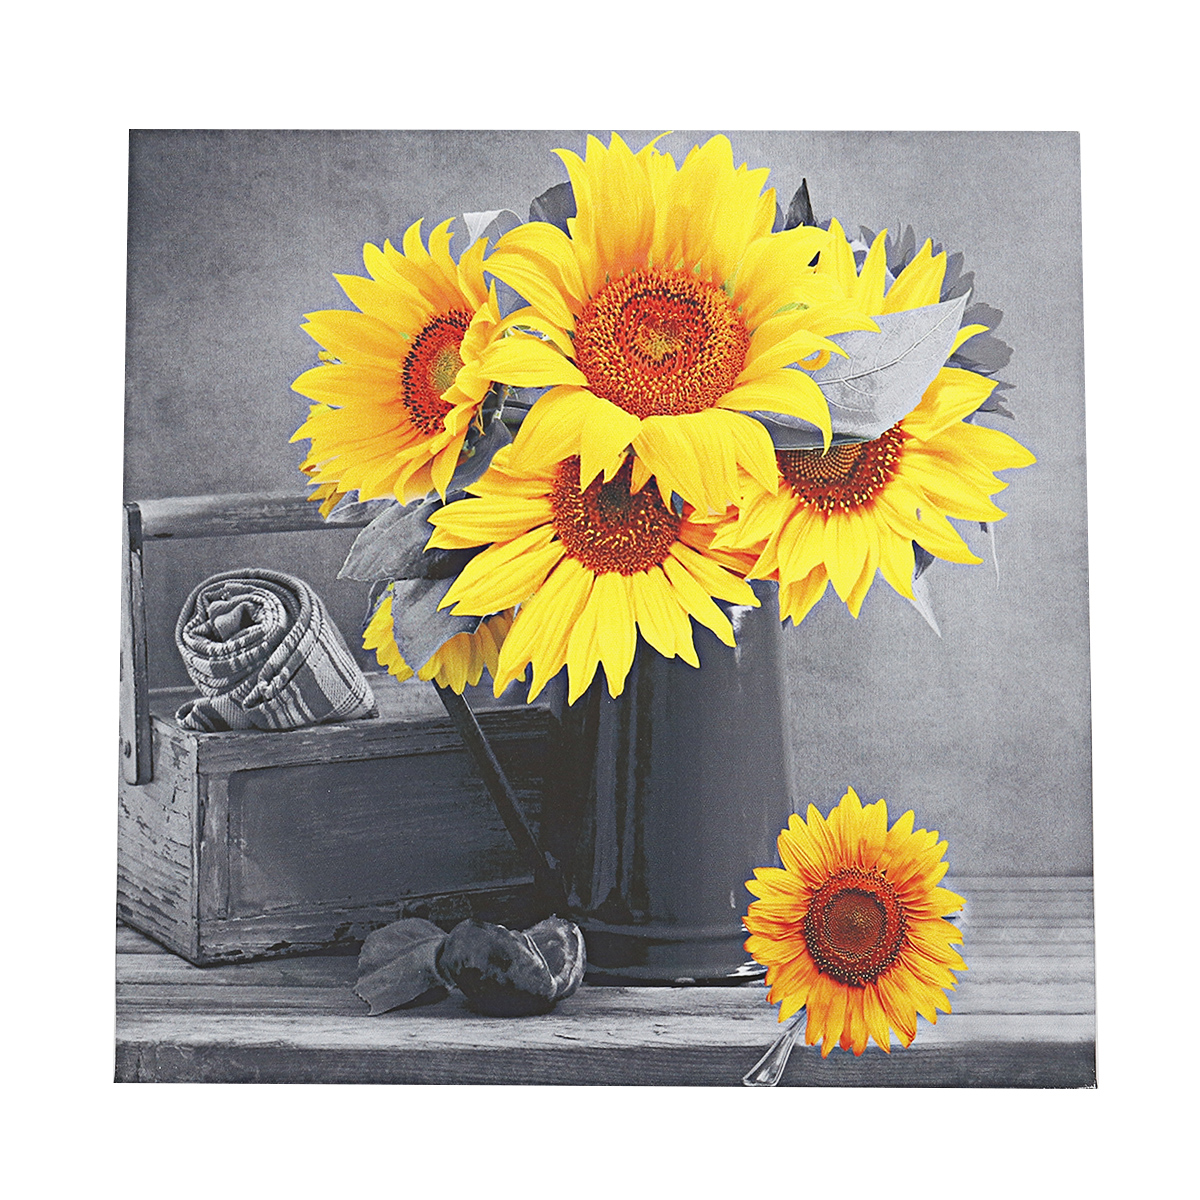 30303-cm-Sunflower-Wall-Art-Painting-Living-Room-Bedroom-Hanging-Canvas-Pictures-Office-Mural-Decora-1791798-14